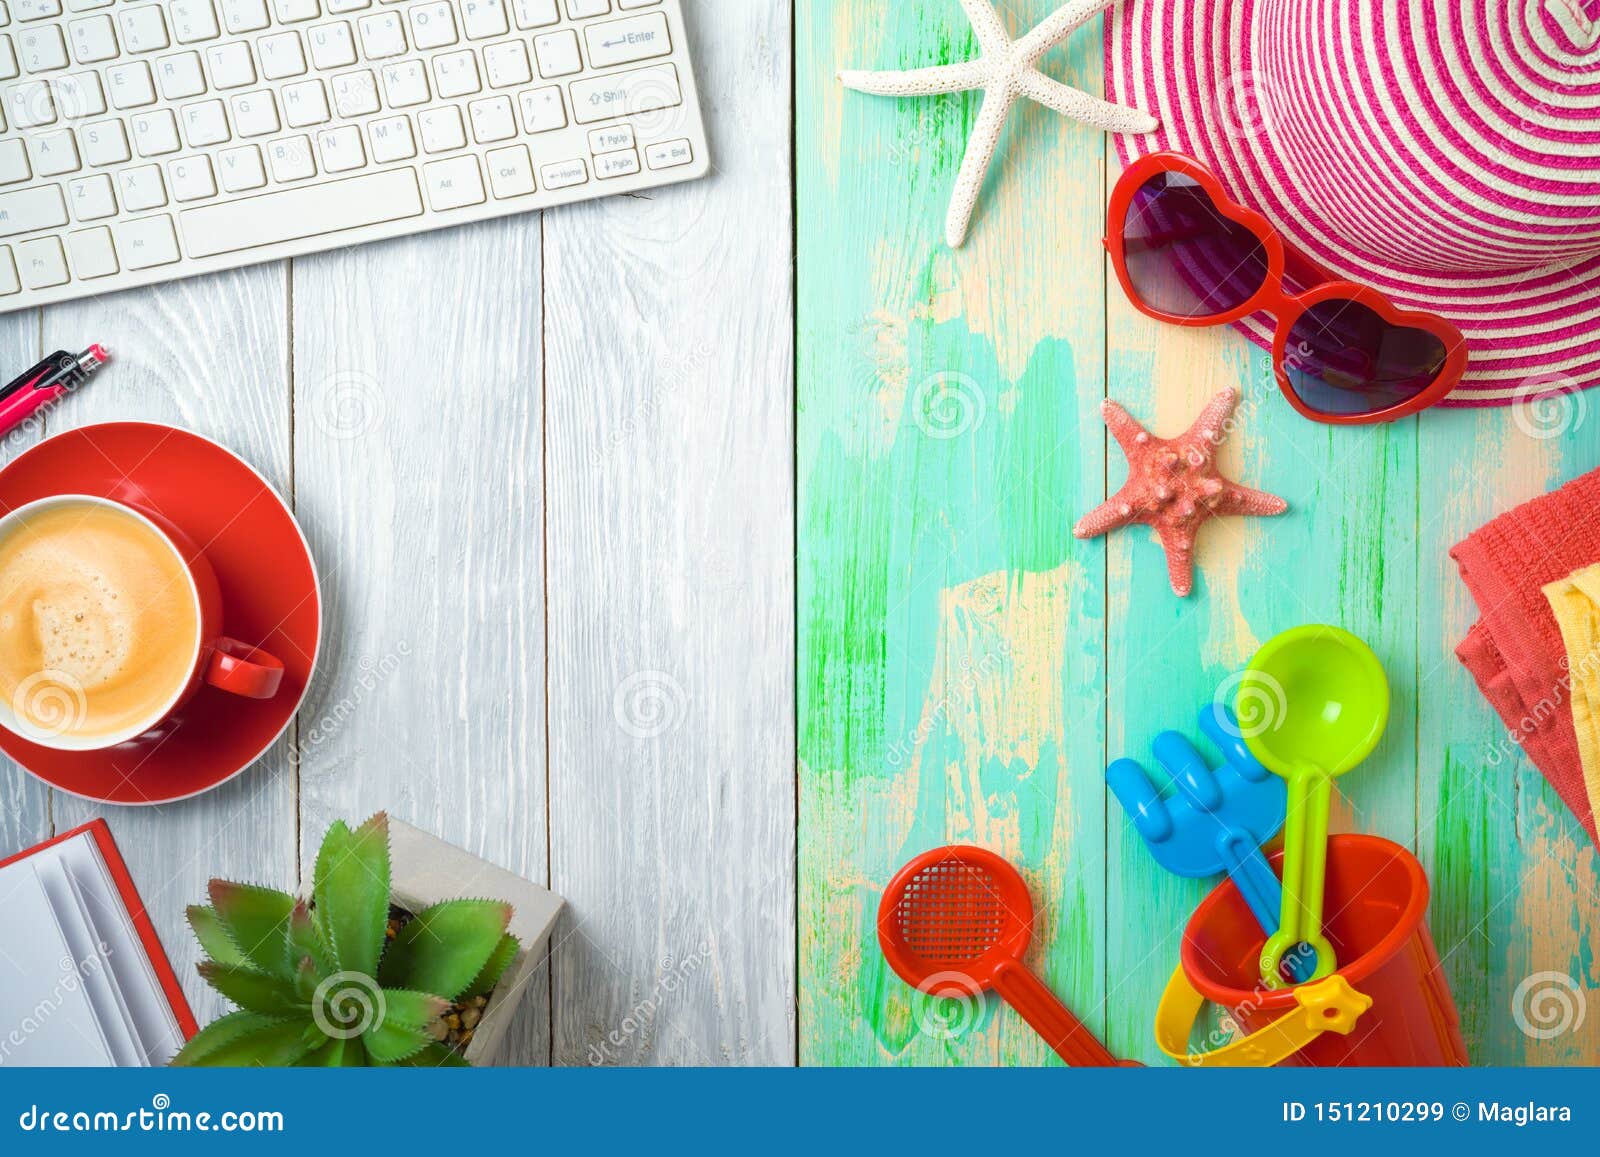 Summer Holiday Vacation Concept With Beach Accessories And Office